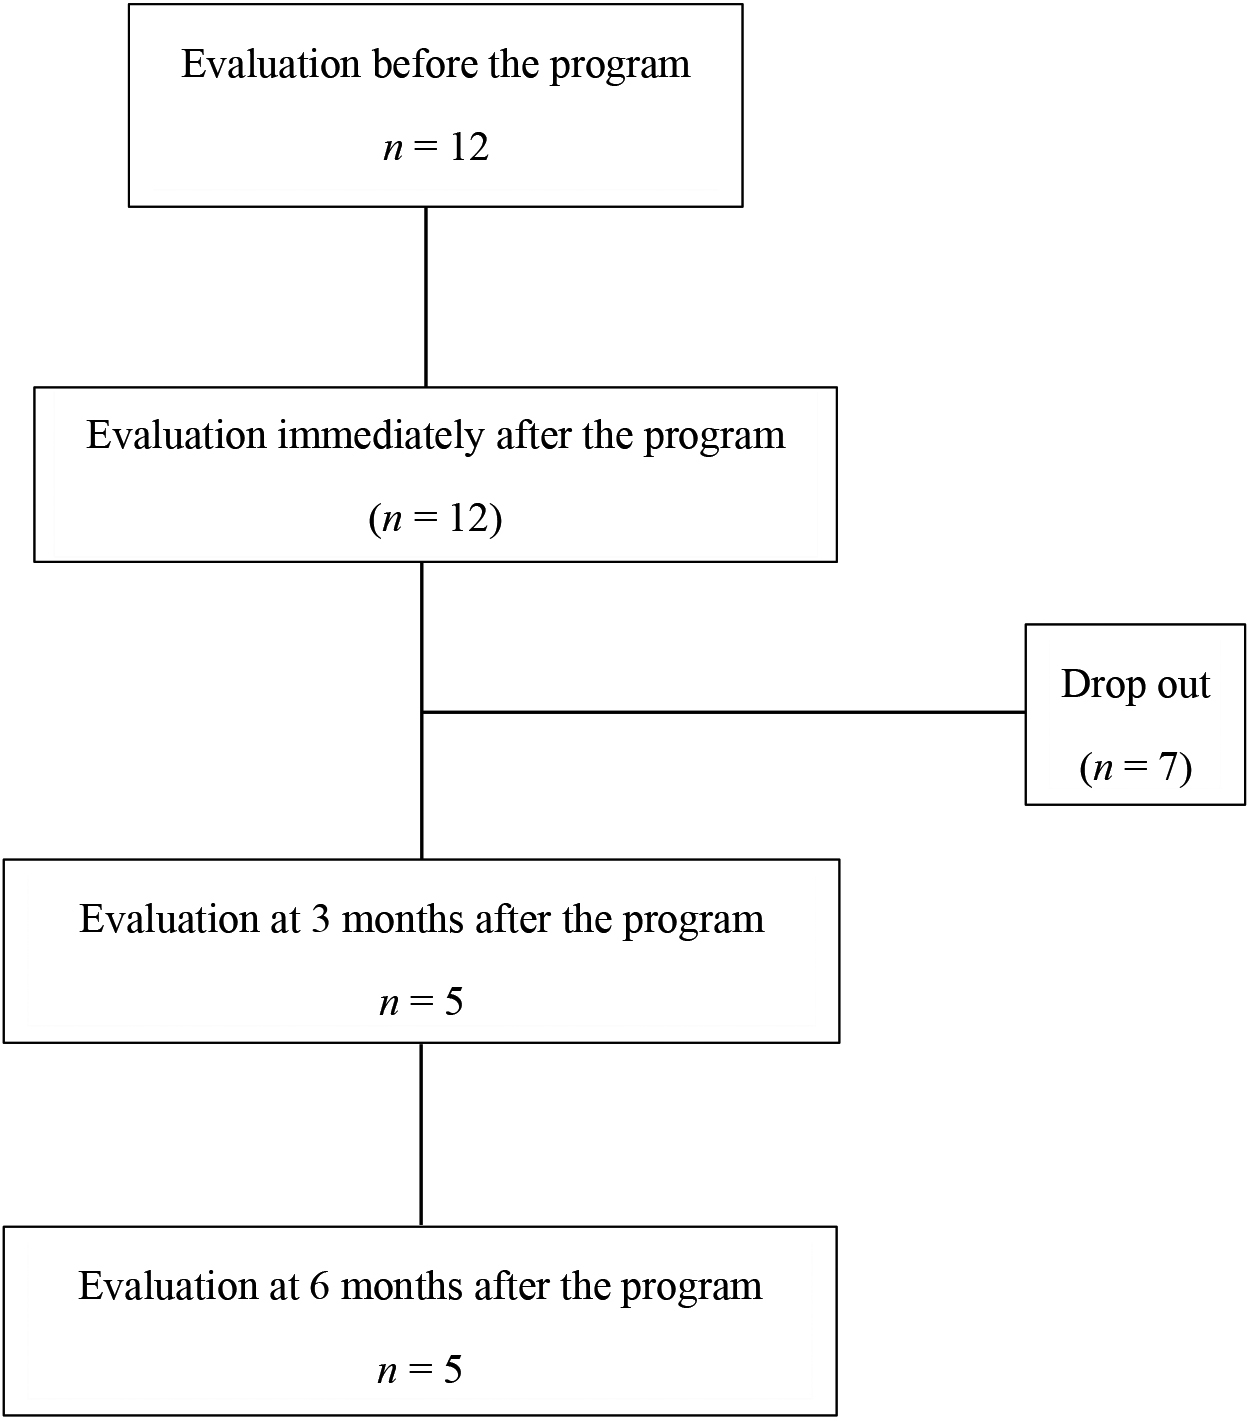 Flowchart of patient dropout. Data regarding these 12 patients were analyzed before and immediately after the inpatient multidisciplinary pain management program. Five patients (continuation group) were also assessed at 3 and 6 months after the program. The remaining seven patients (dropout group) could not be assessed after the program. 